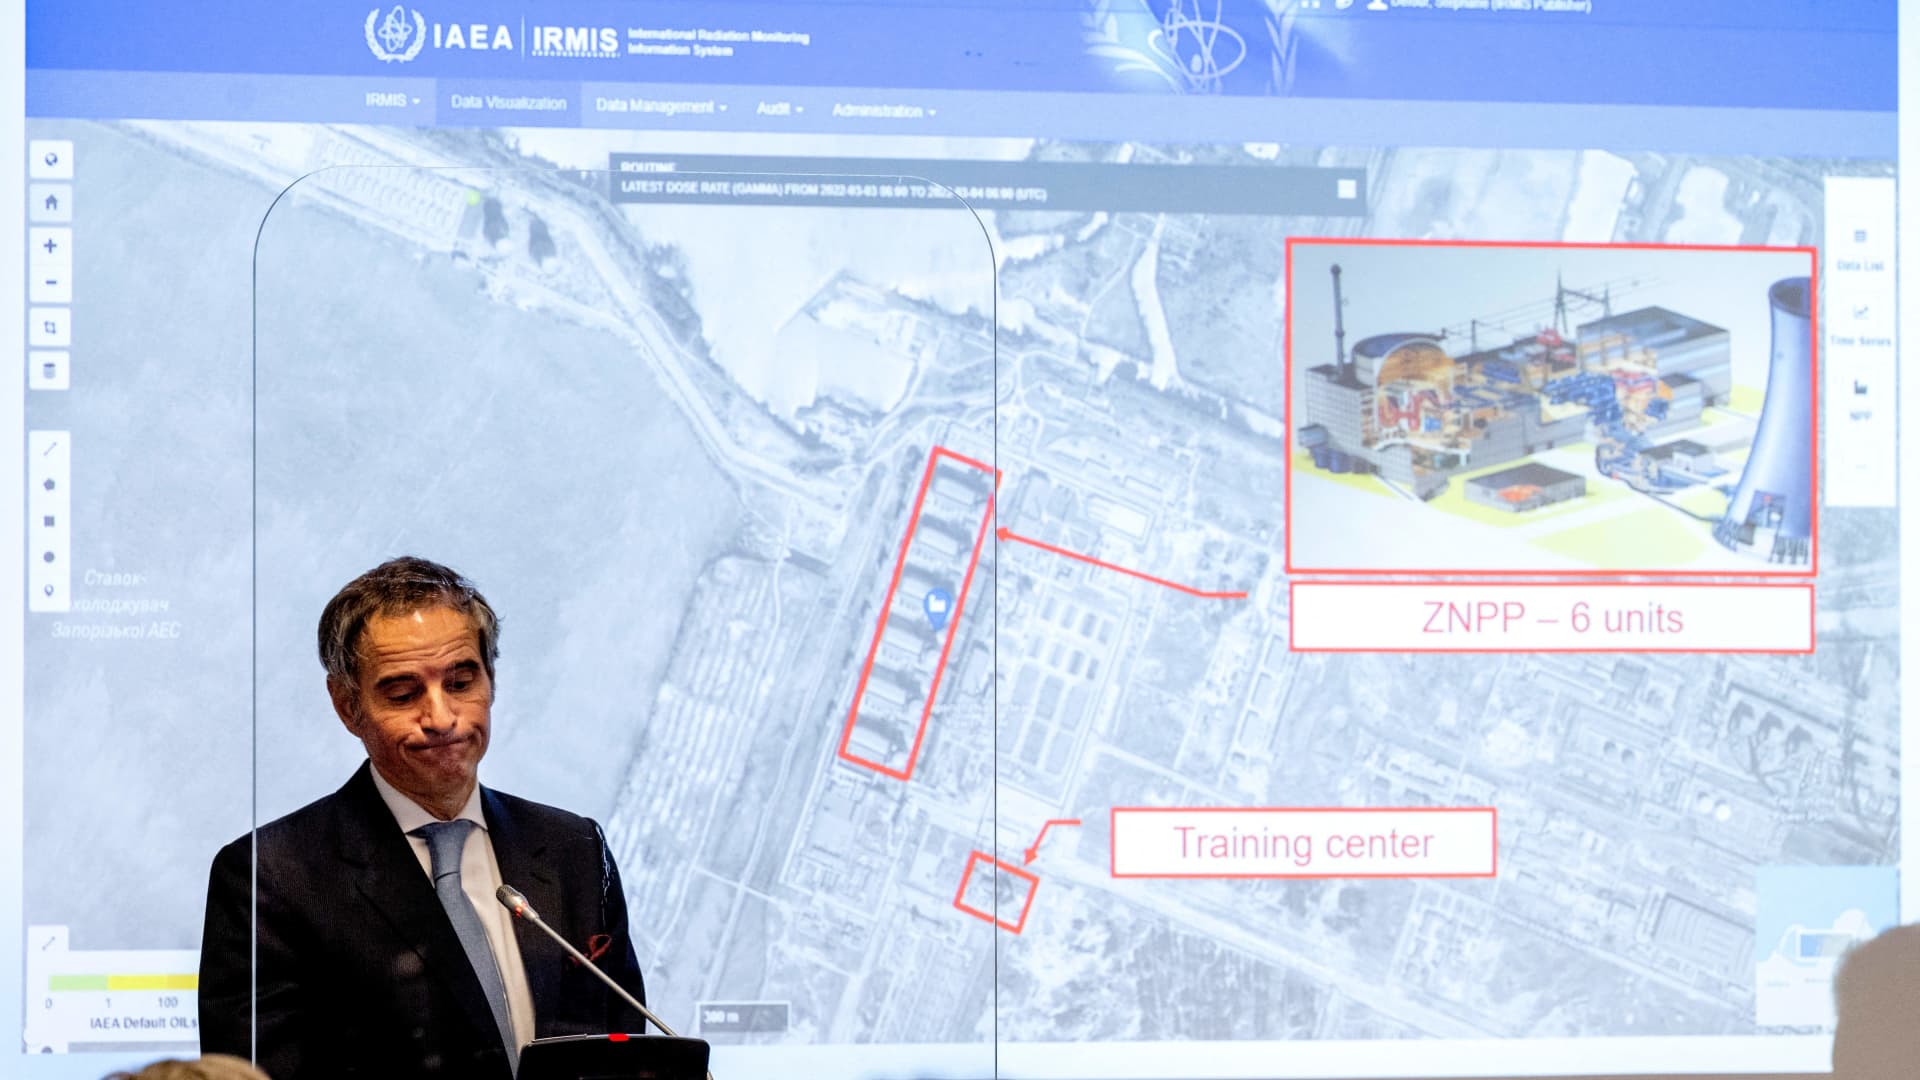 Rafael Grossi, Director General of the International Atomic Energy Agency, stands in front of a map of the Ukrainian Zaporizhzhia power plant during a special press conference at the IAEA headquarters in Vienna, Austria on March 4, 2022.